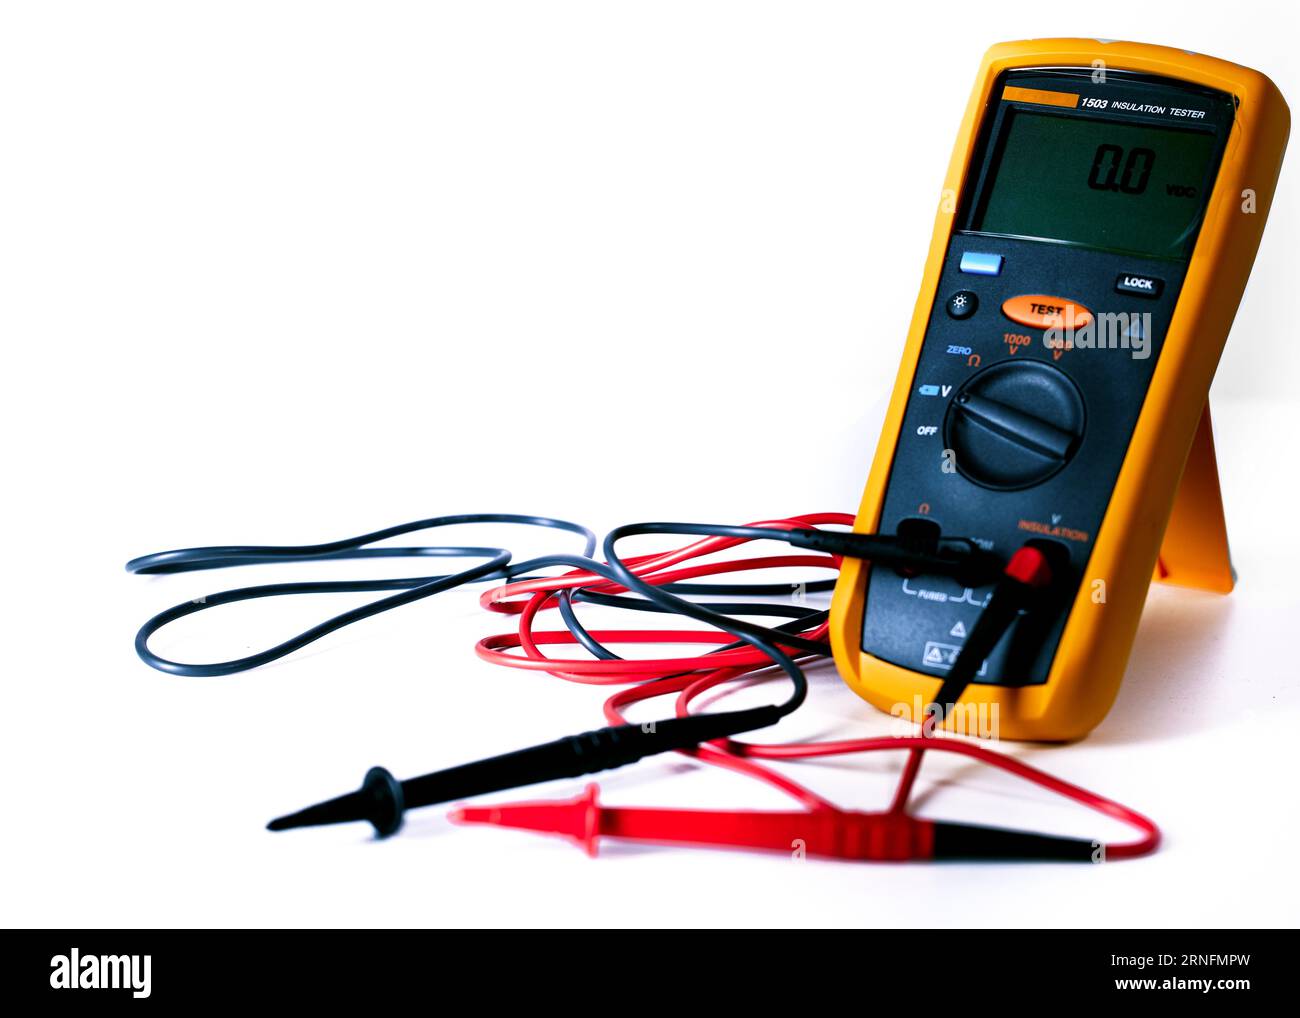 Digital multimeter with probes and green backlit display isolated on a white background Stock Photo